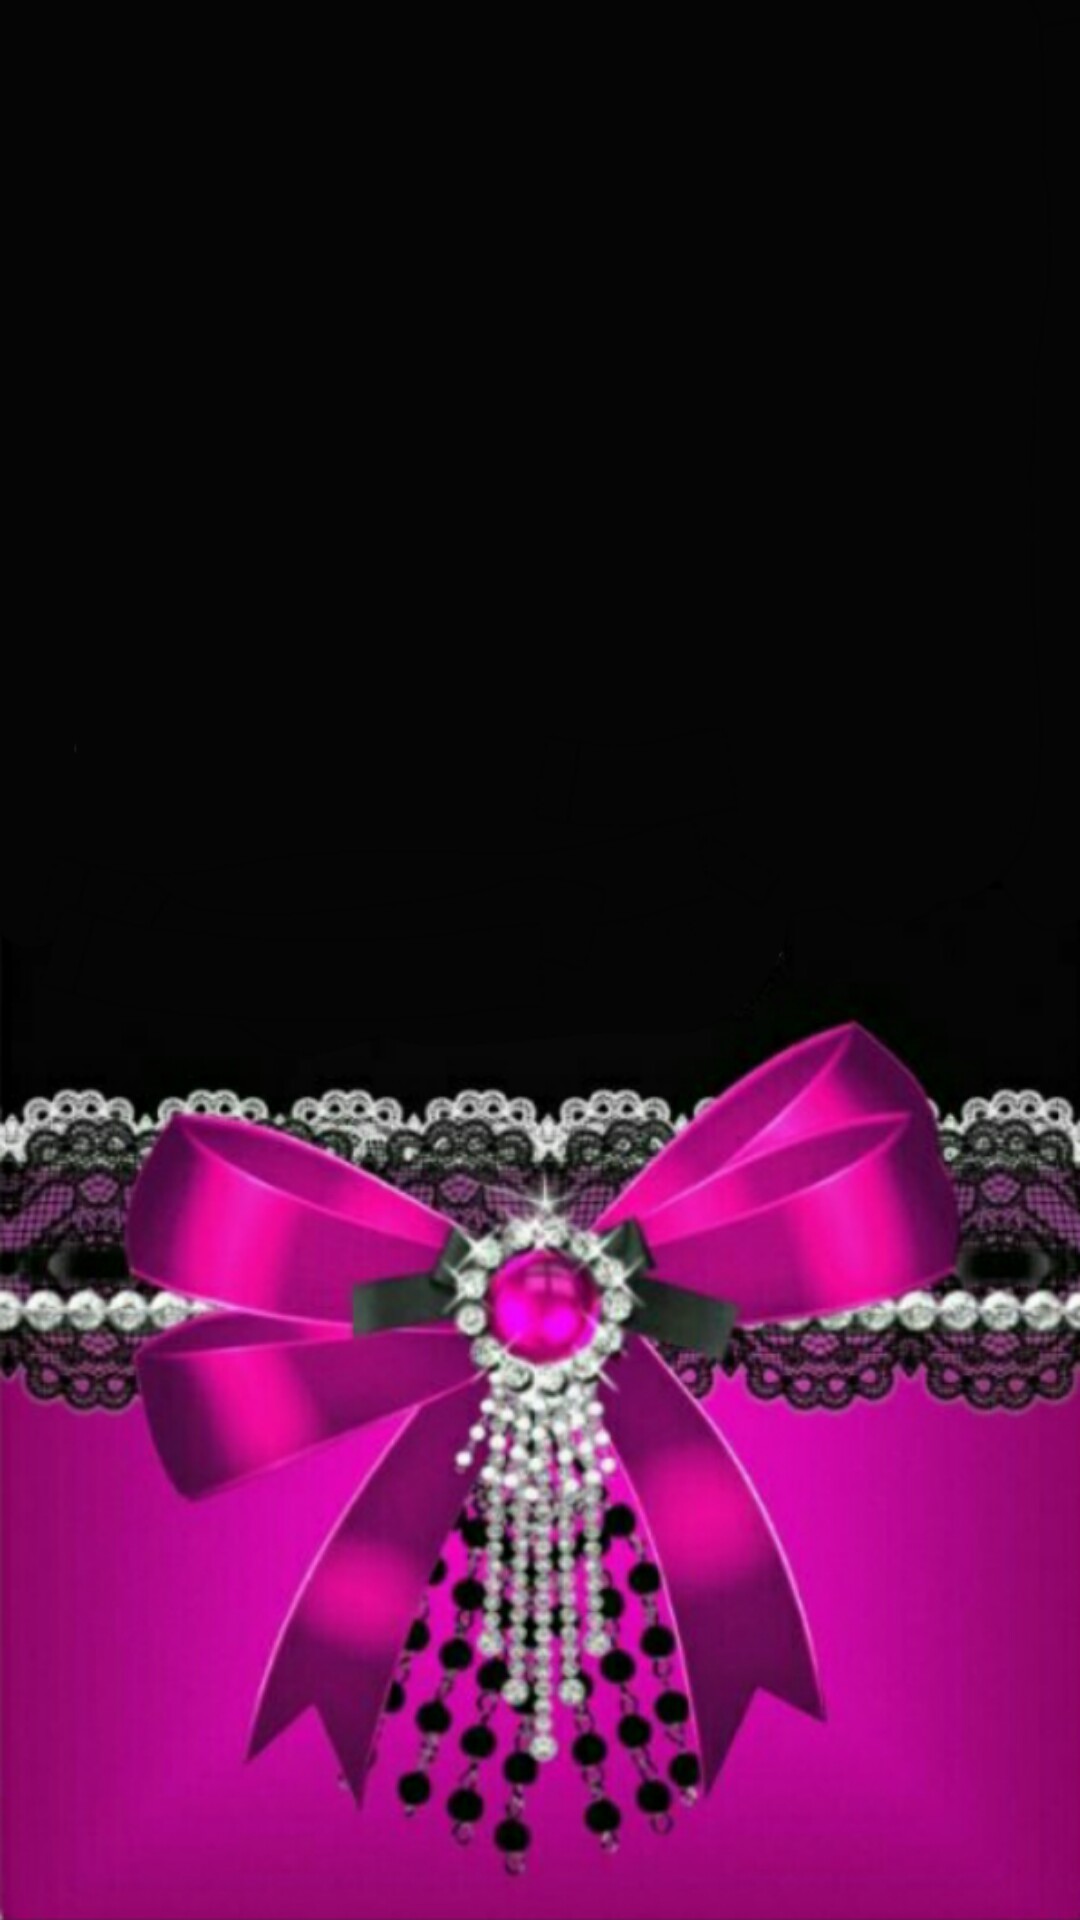 1080x1920 Black with Pink Bow Wallpaper.